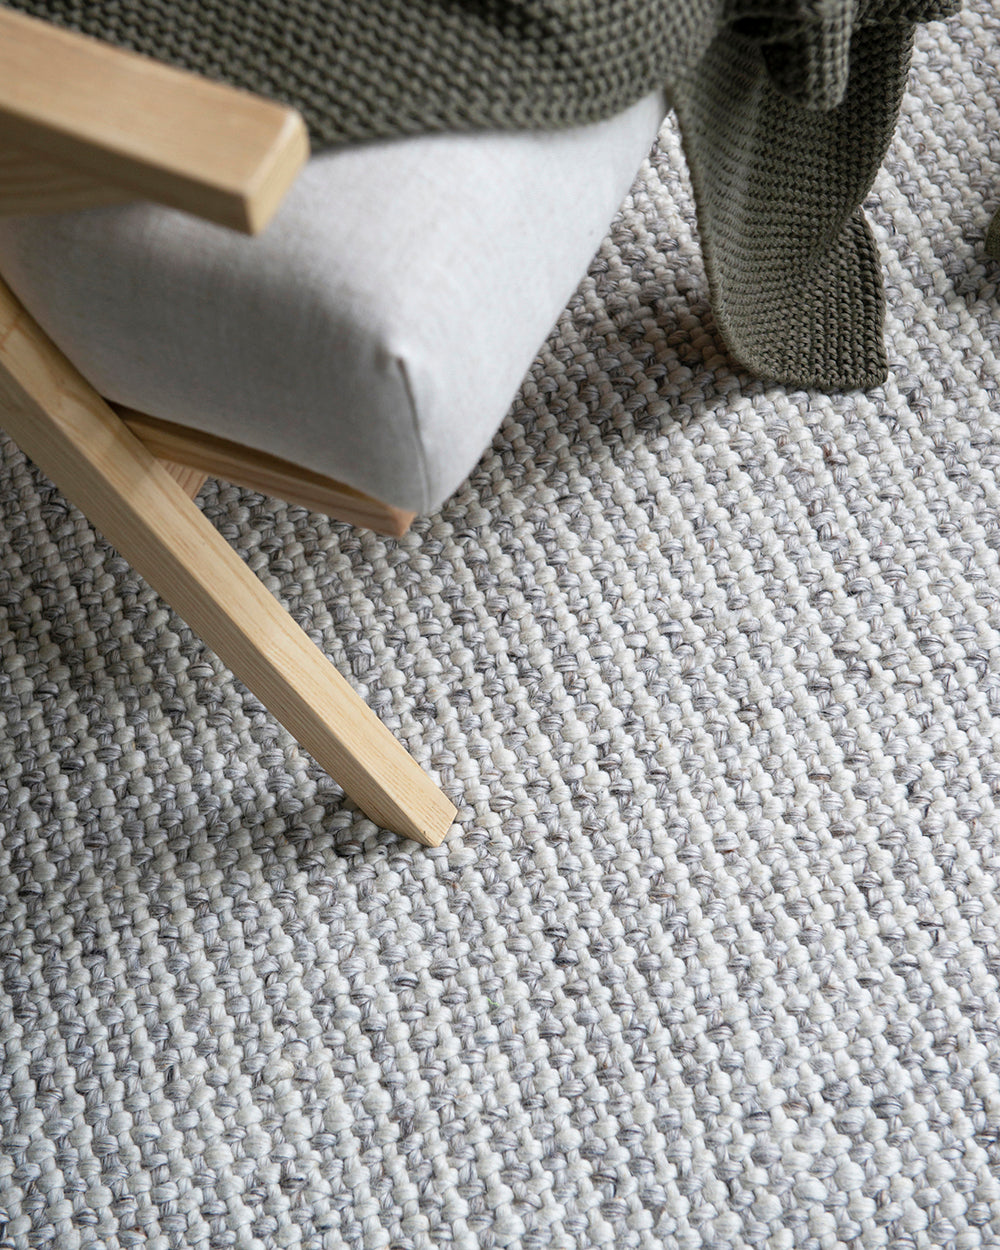 Kansas Oyster Rug from Baya Furtex Stockist Make Your House A Home, Furniture Store Bendigo. Free Australia Wide Delivery. Mulberi Rugs.